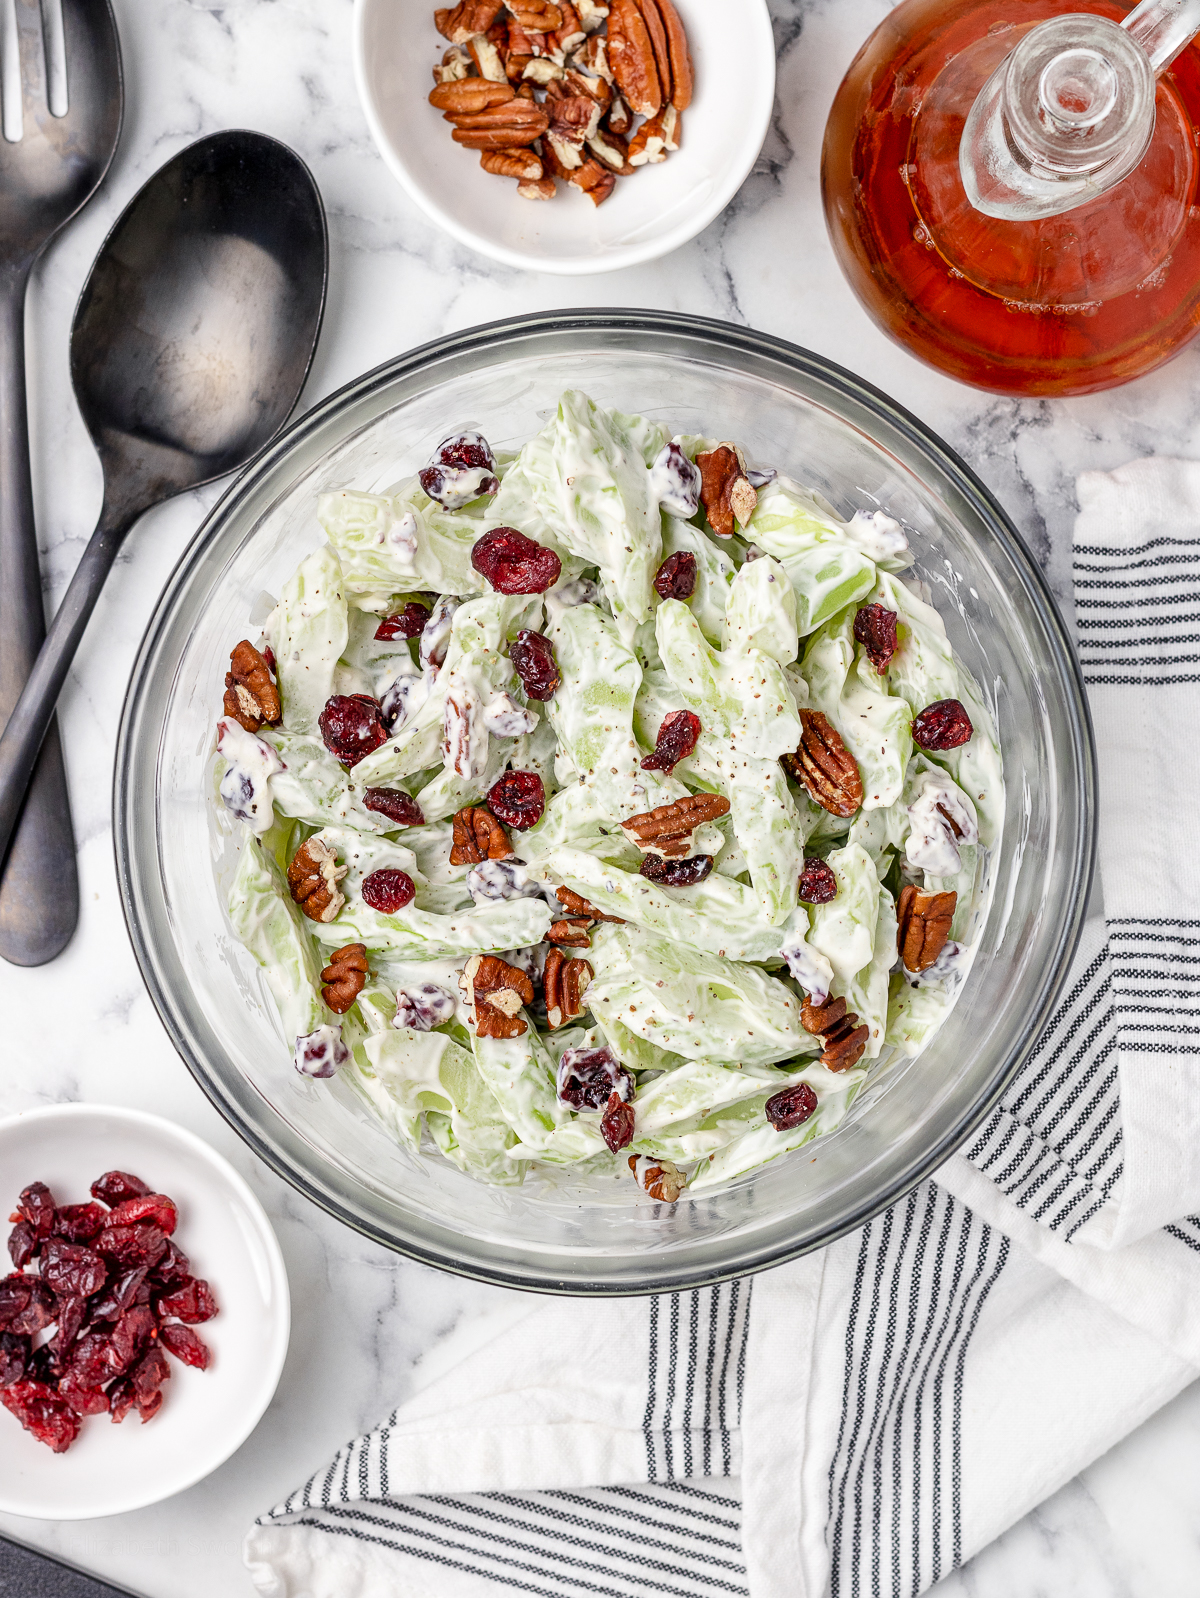 Celery Salad with red wine vinegar, more toasted pecans, and dried cranberries on the side. Serving spoons ready to scoop.